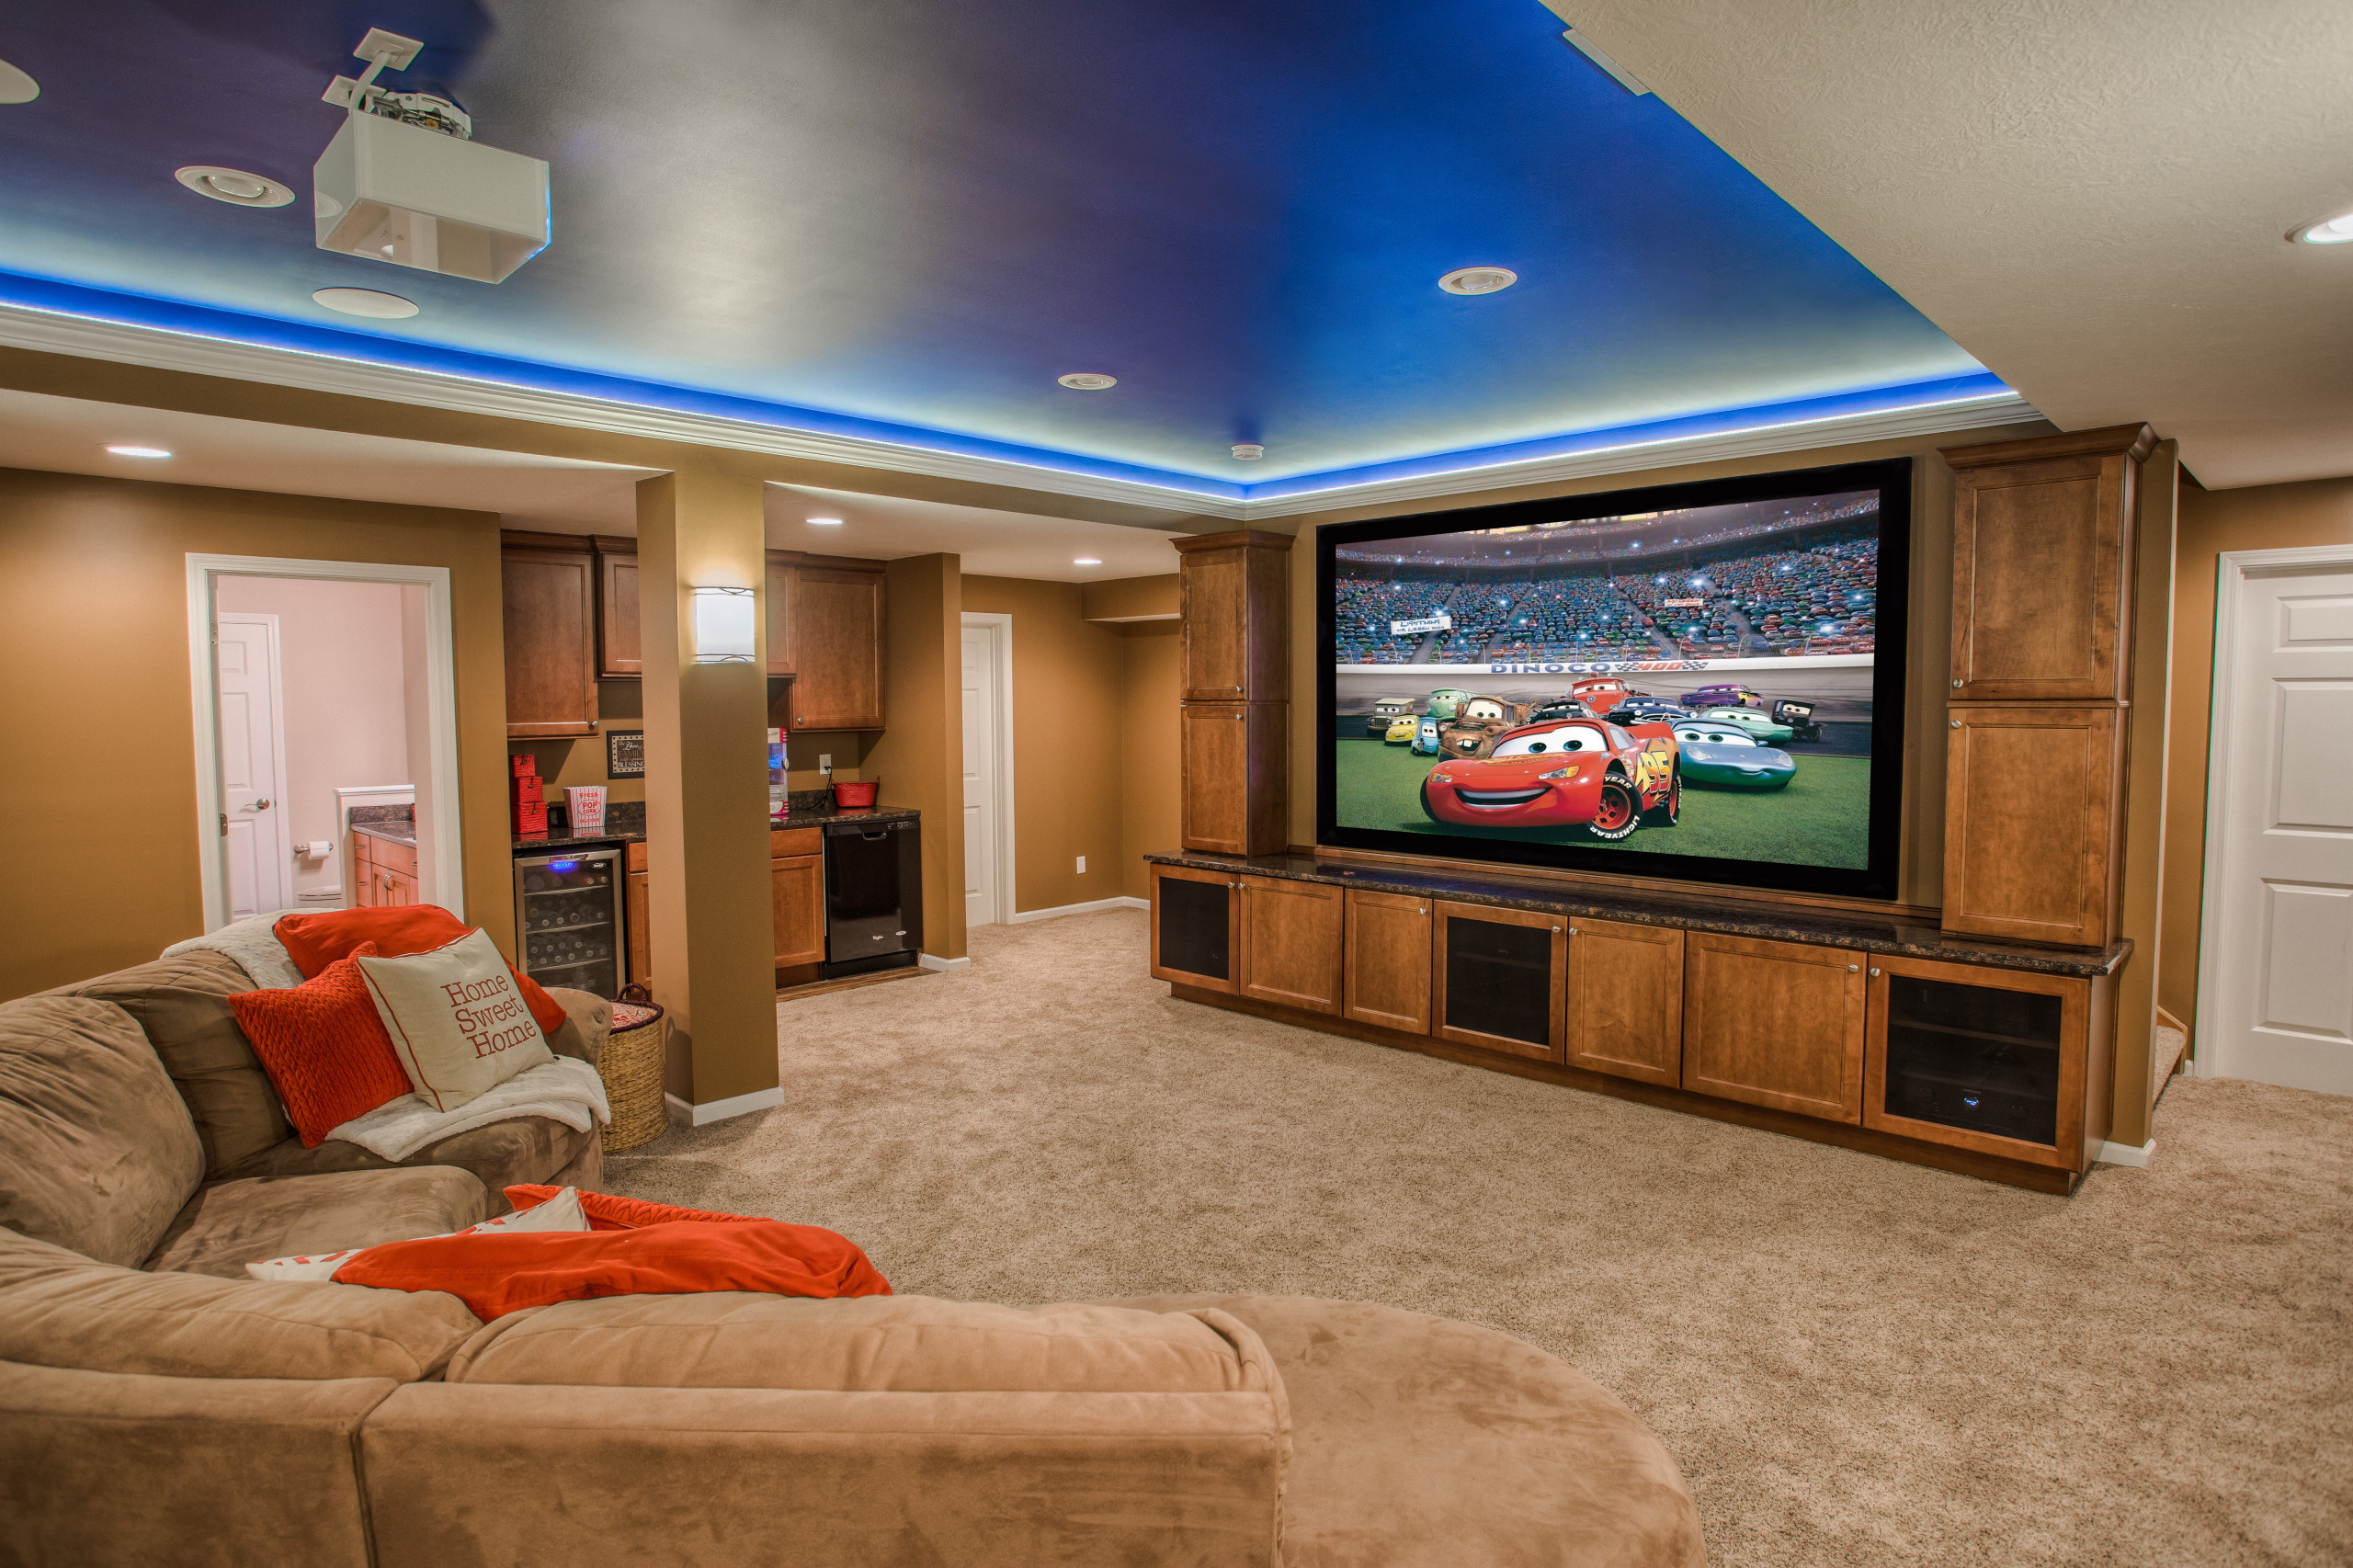 75 Beautiful Basement Home Theater Pictures & Ideas | Houzz